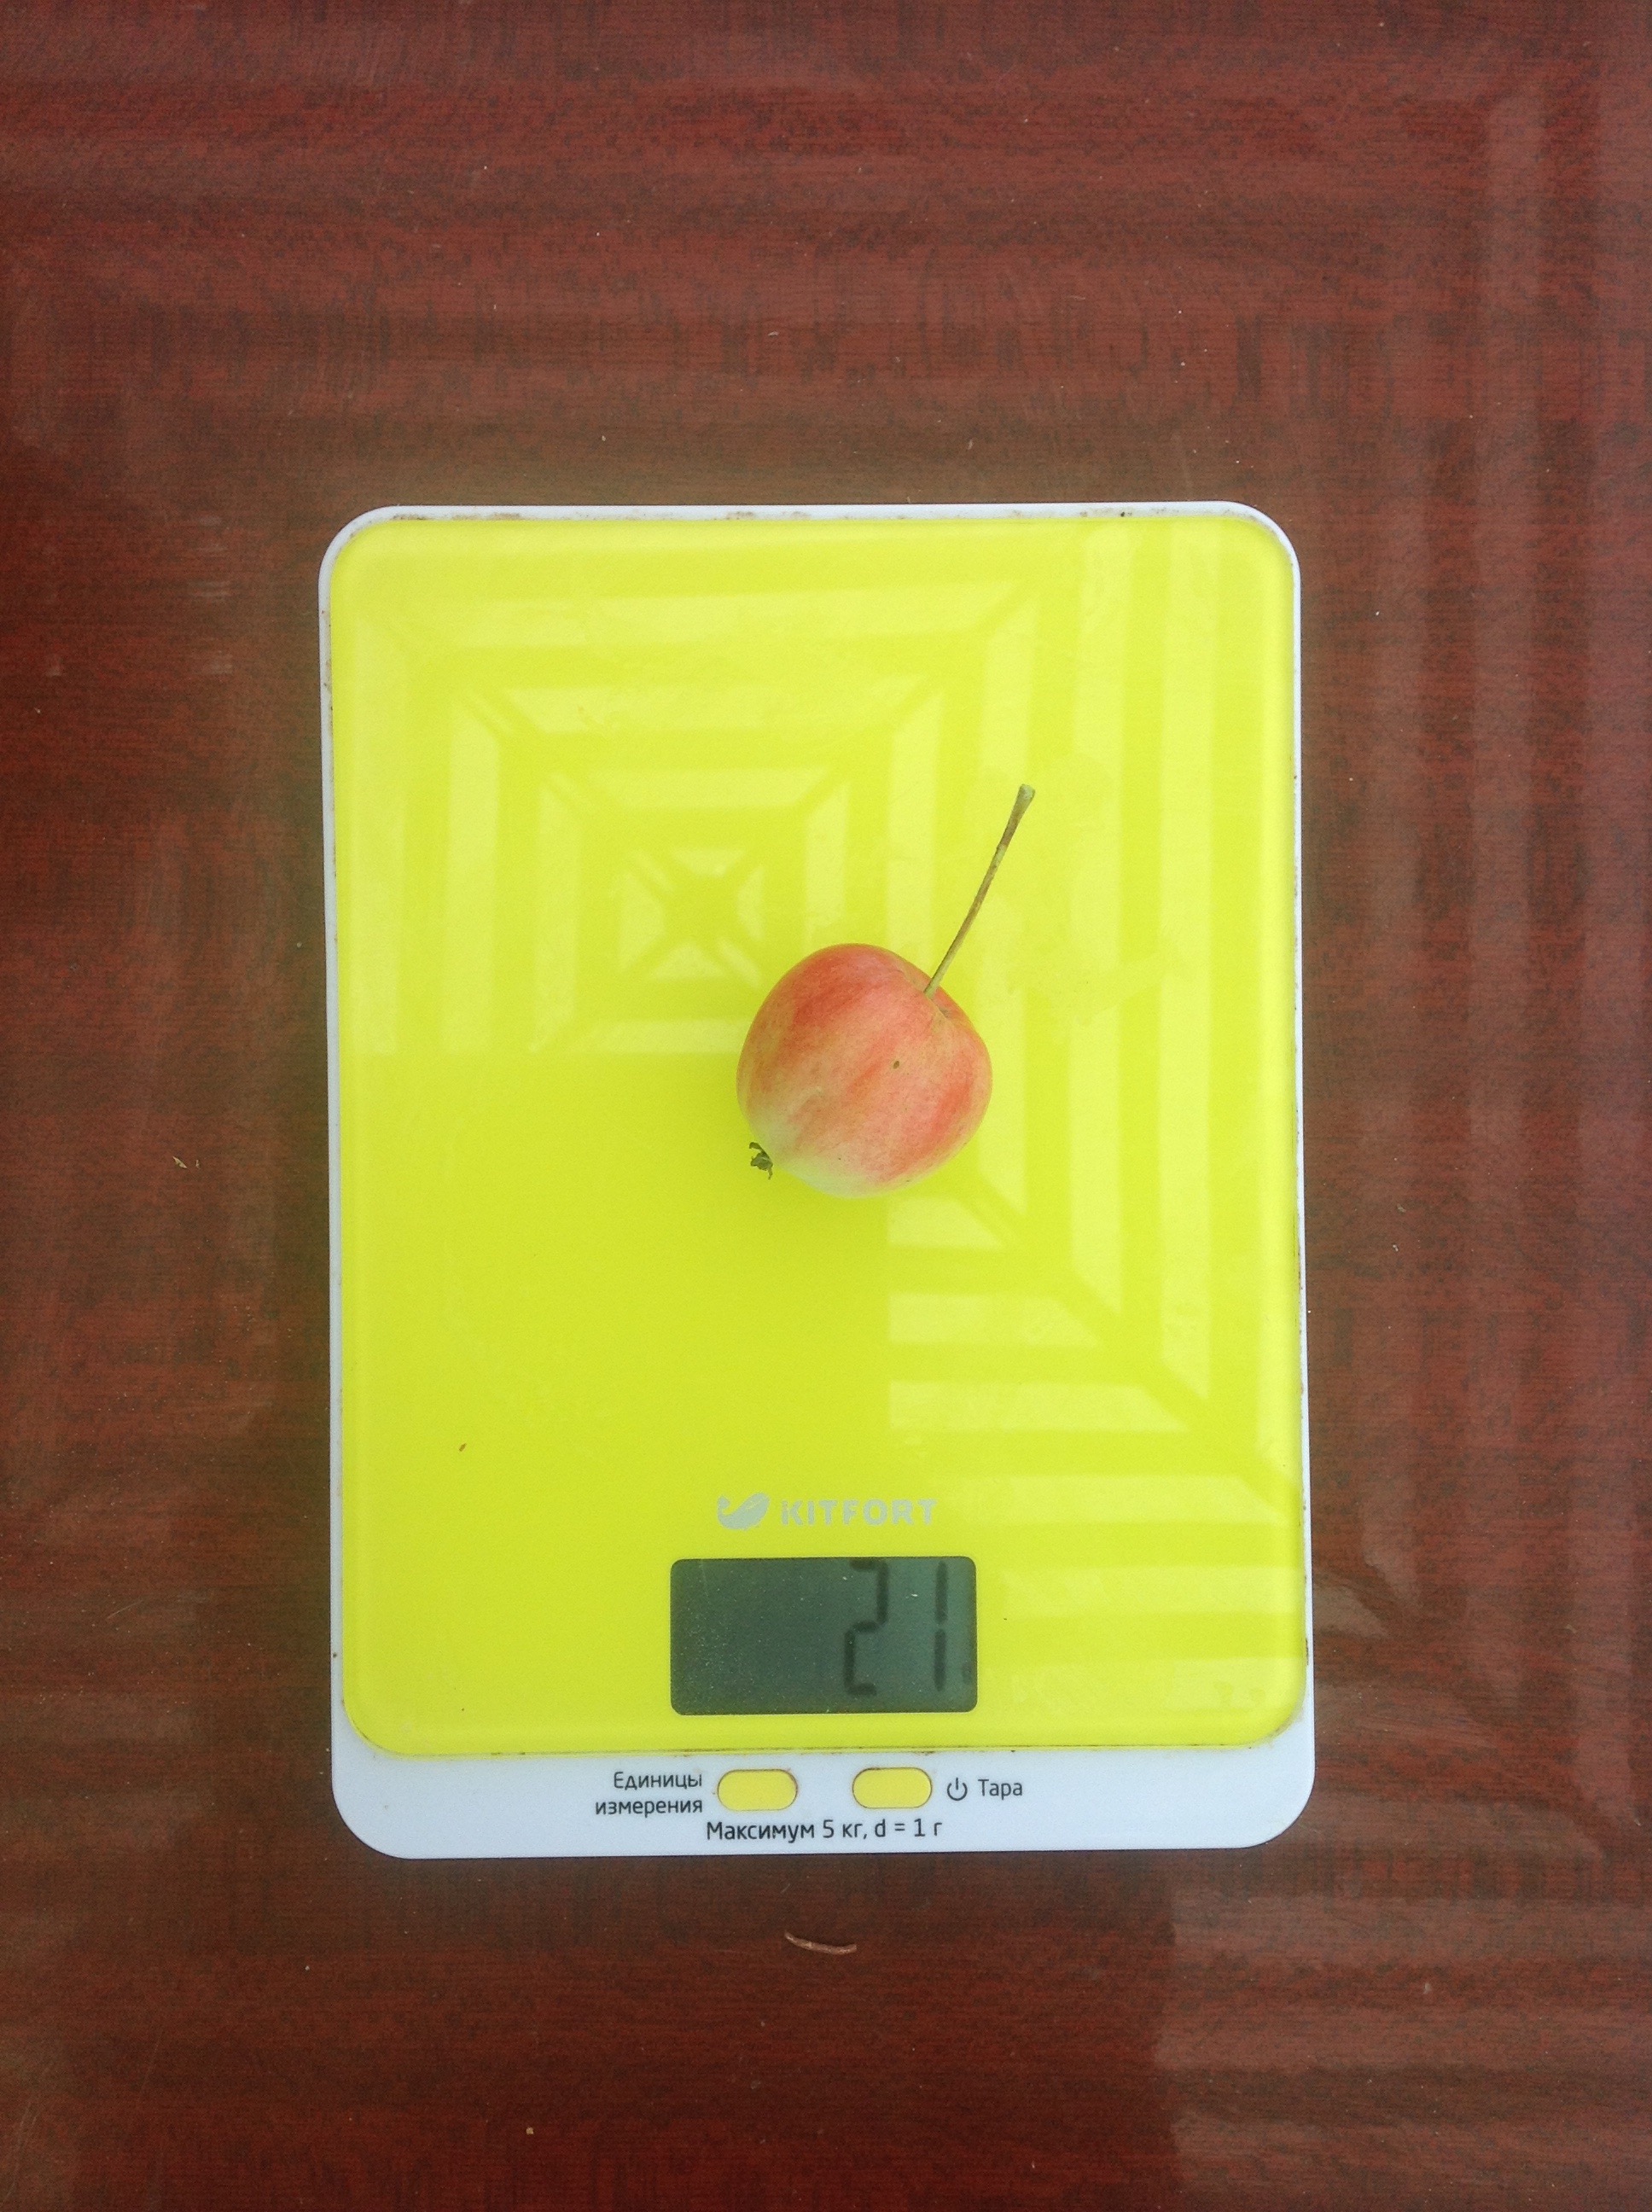 weight of a small orchard apple